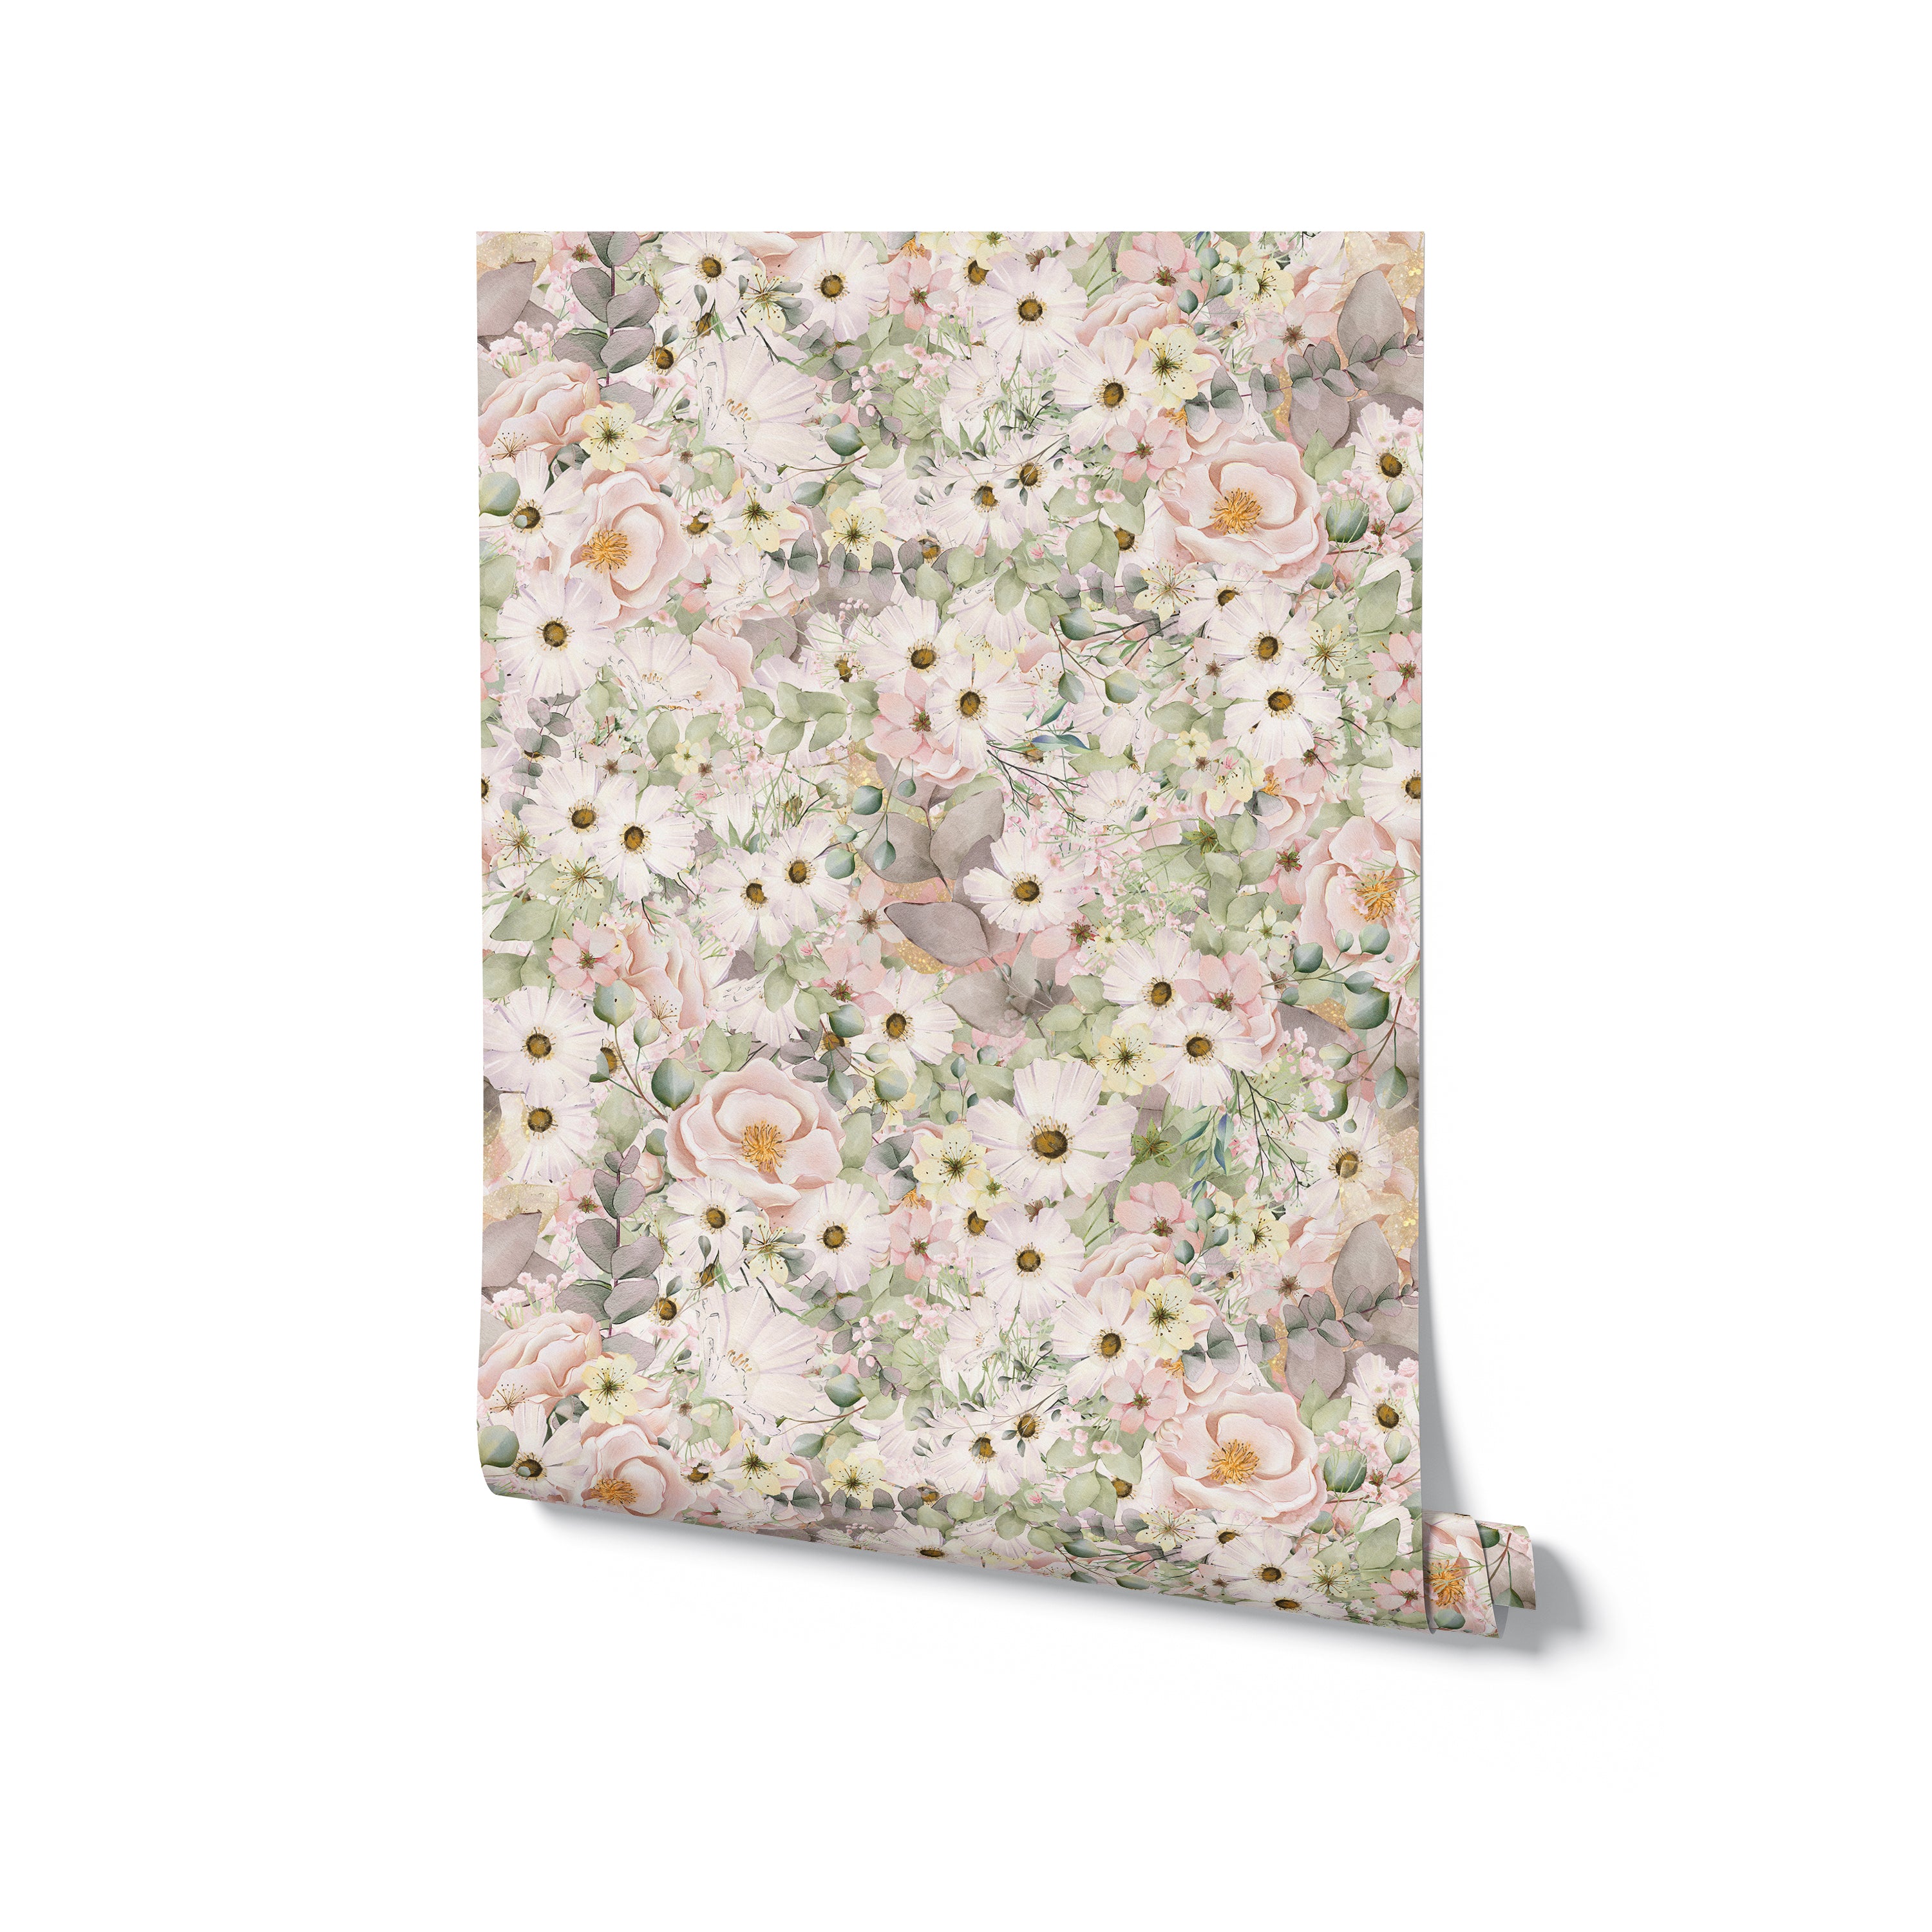 A rolled wallpaper depicting the Pink Fleur design, which features an intricate arrangement of pink flowers and greenery. The floral pattern is detailed and vibrant, perfect for adding a touch of nature's beauty to any room